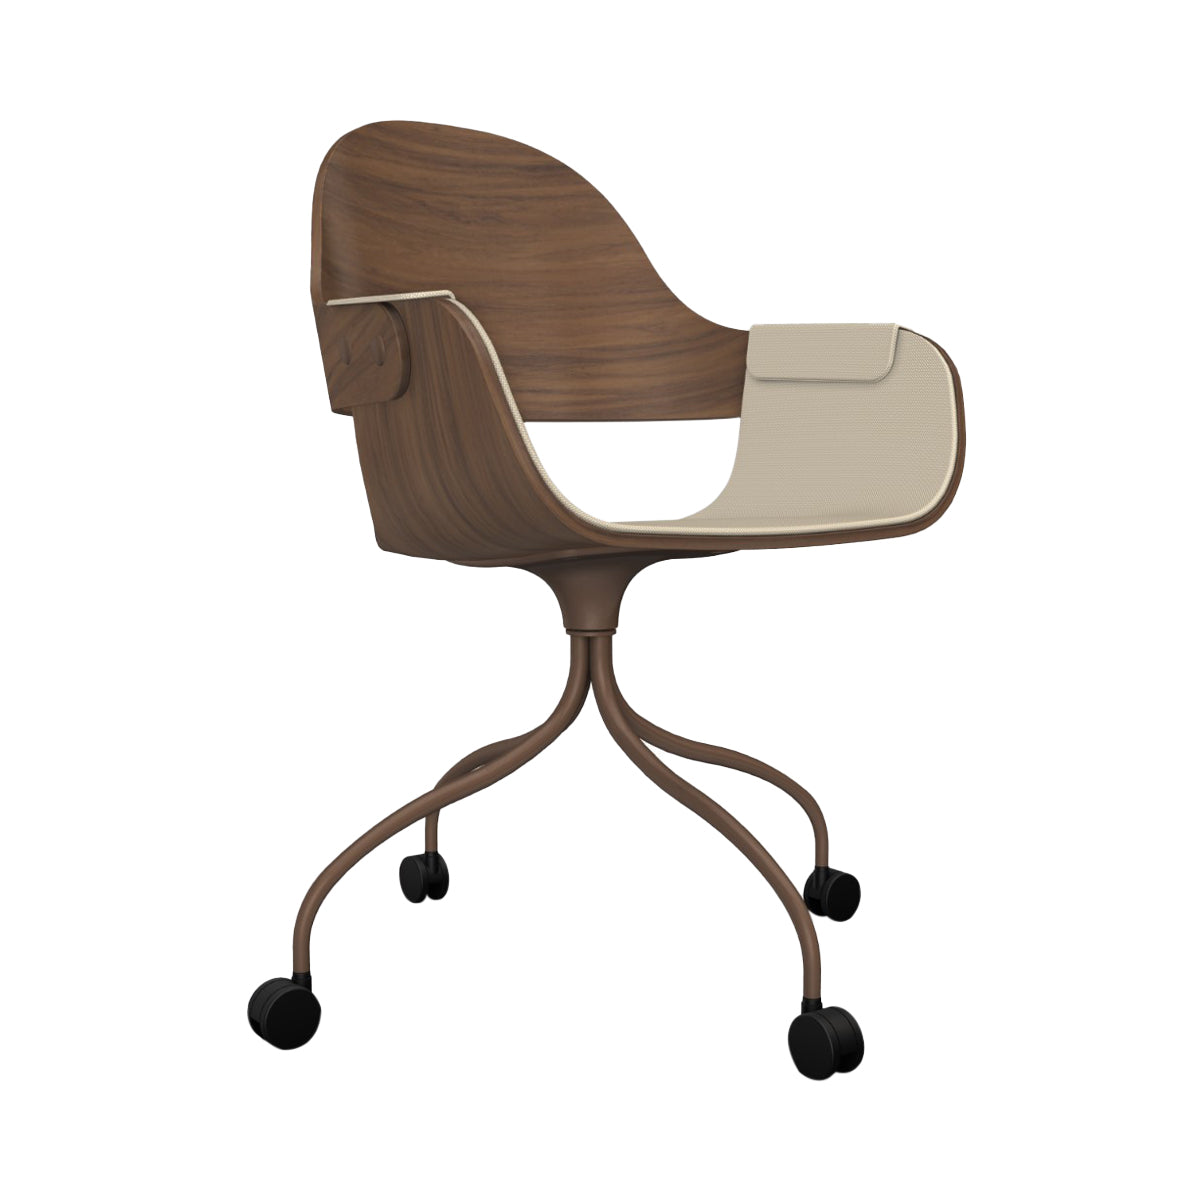 Showtime Nude Chair with Wheel: Interior Seat + Armrest Upholstered + Walnut + Pale Brown